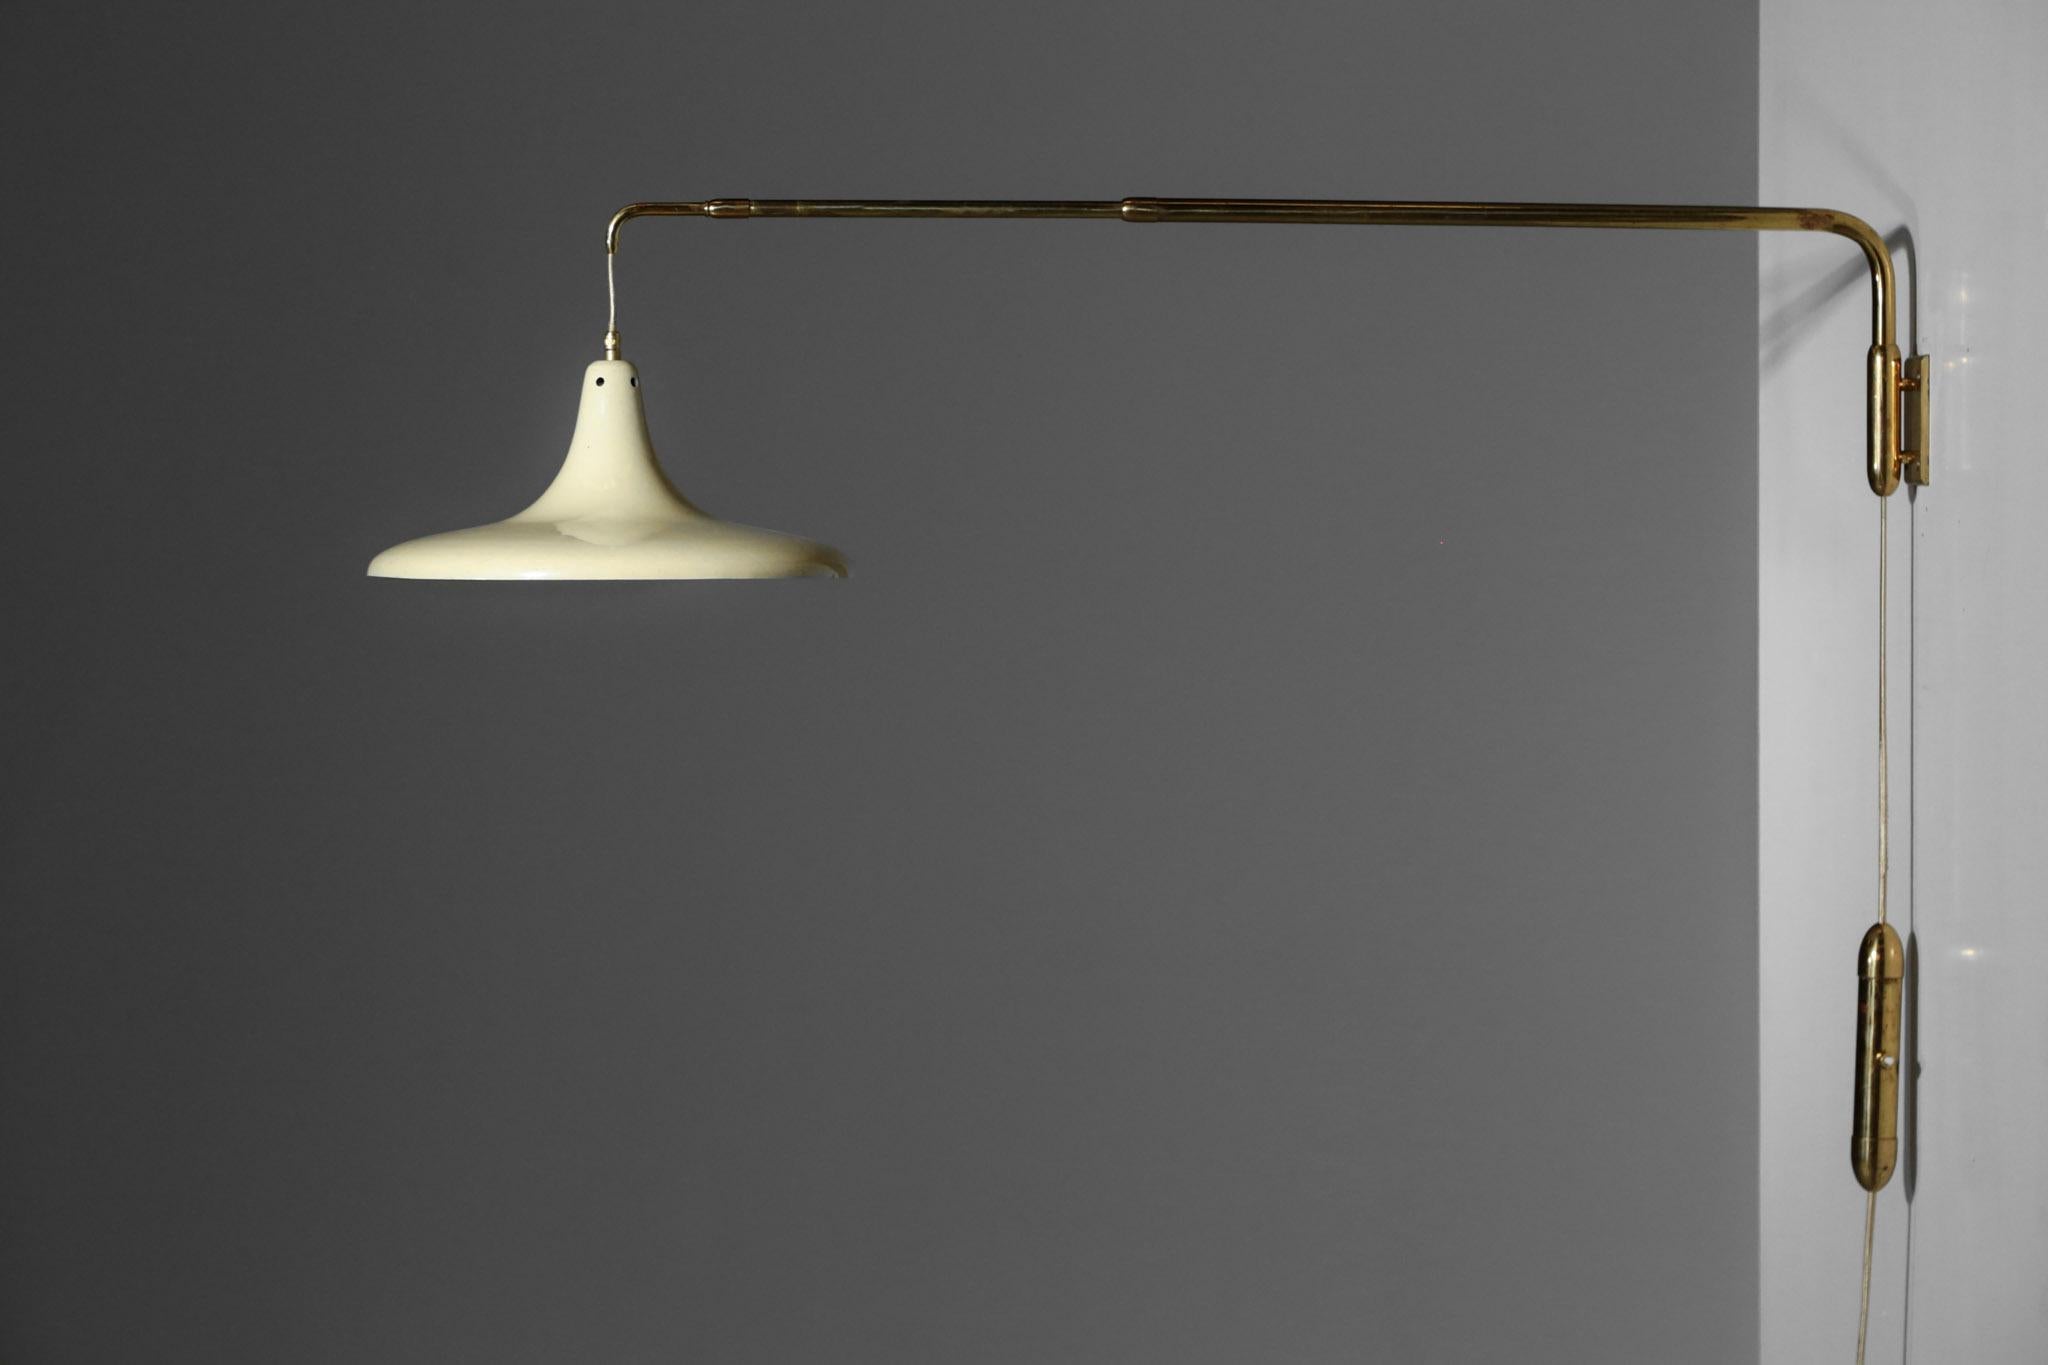 Large wall light from Italy, adjustable rod with counter weight system.  Made of brass with beige metal lampshade
Measures: L. max 126 cm (144 with lampshade) / L. min 71 cm (89 cm) / Diam. lampshade 36 cm /  H. 20 cm.